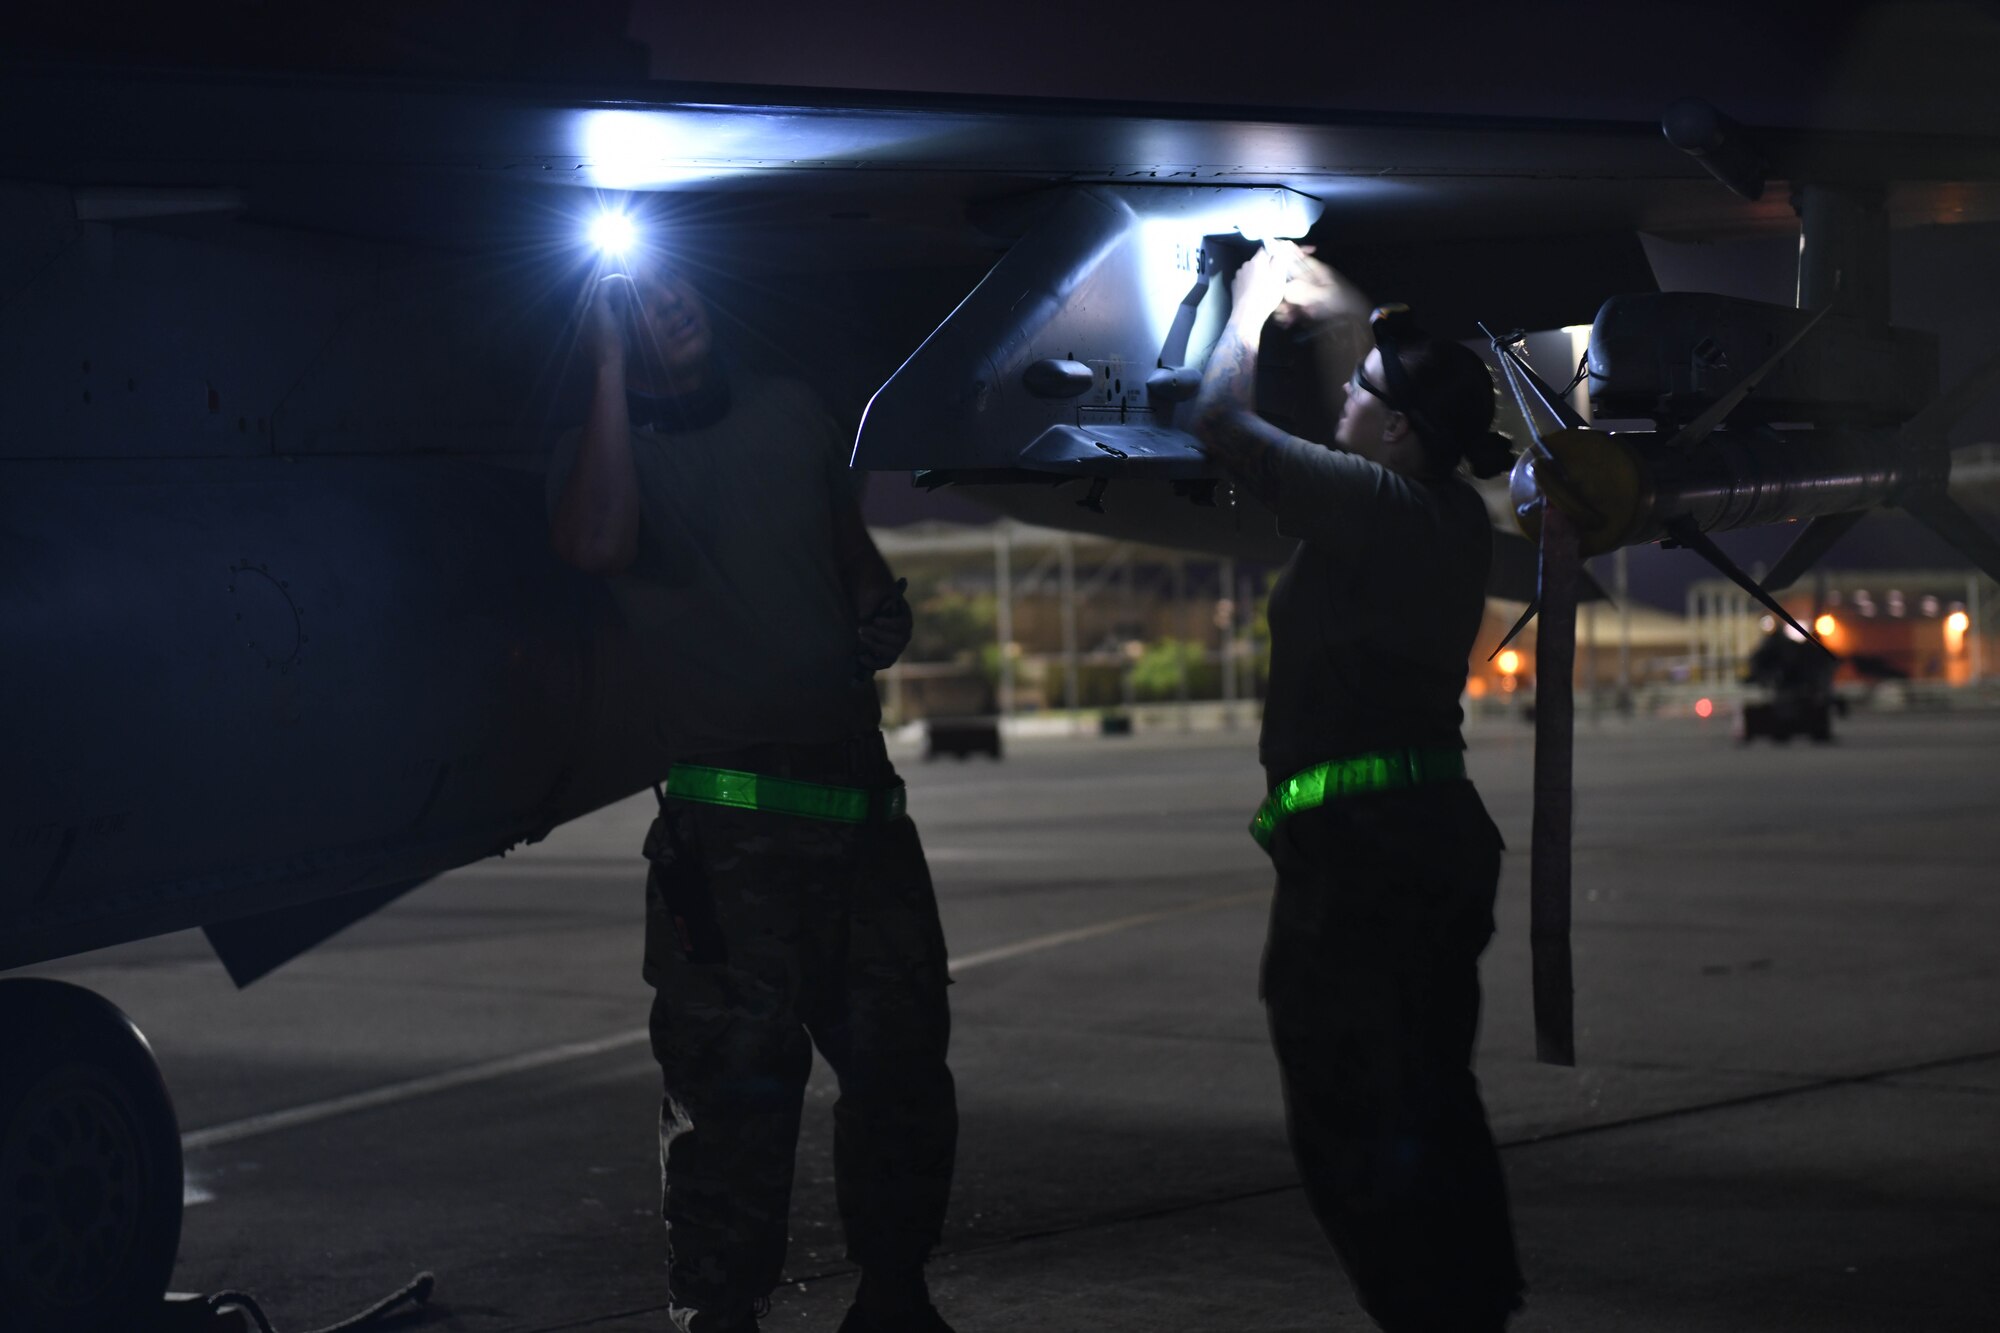 Senior Airman Kevin Bates (left) and Staff Sgt. Crysta Bass, 310th Aircraft Maintenance unit weapons load crew members, inspect an F-16 Fighting Falcon, June 24, 2020, at Luke Air Force Base, Ariz.